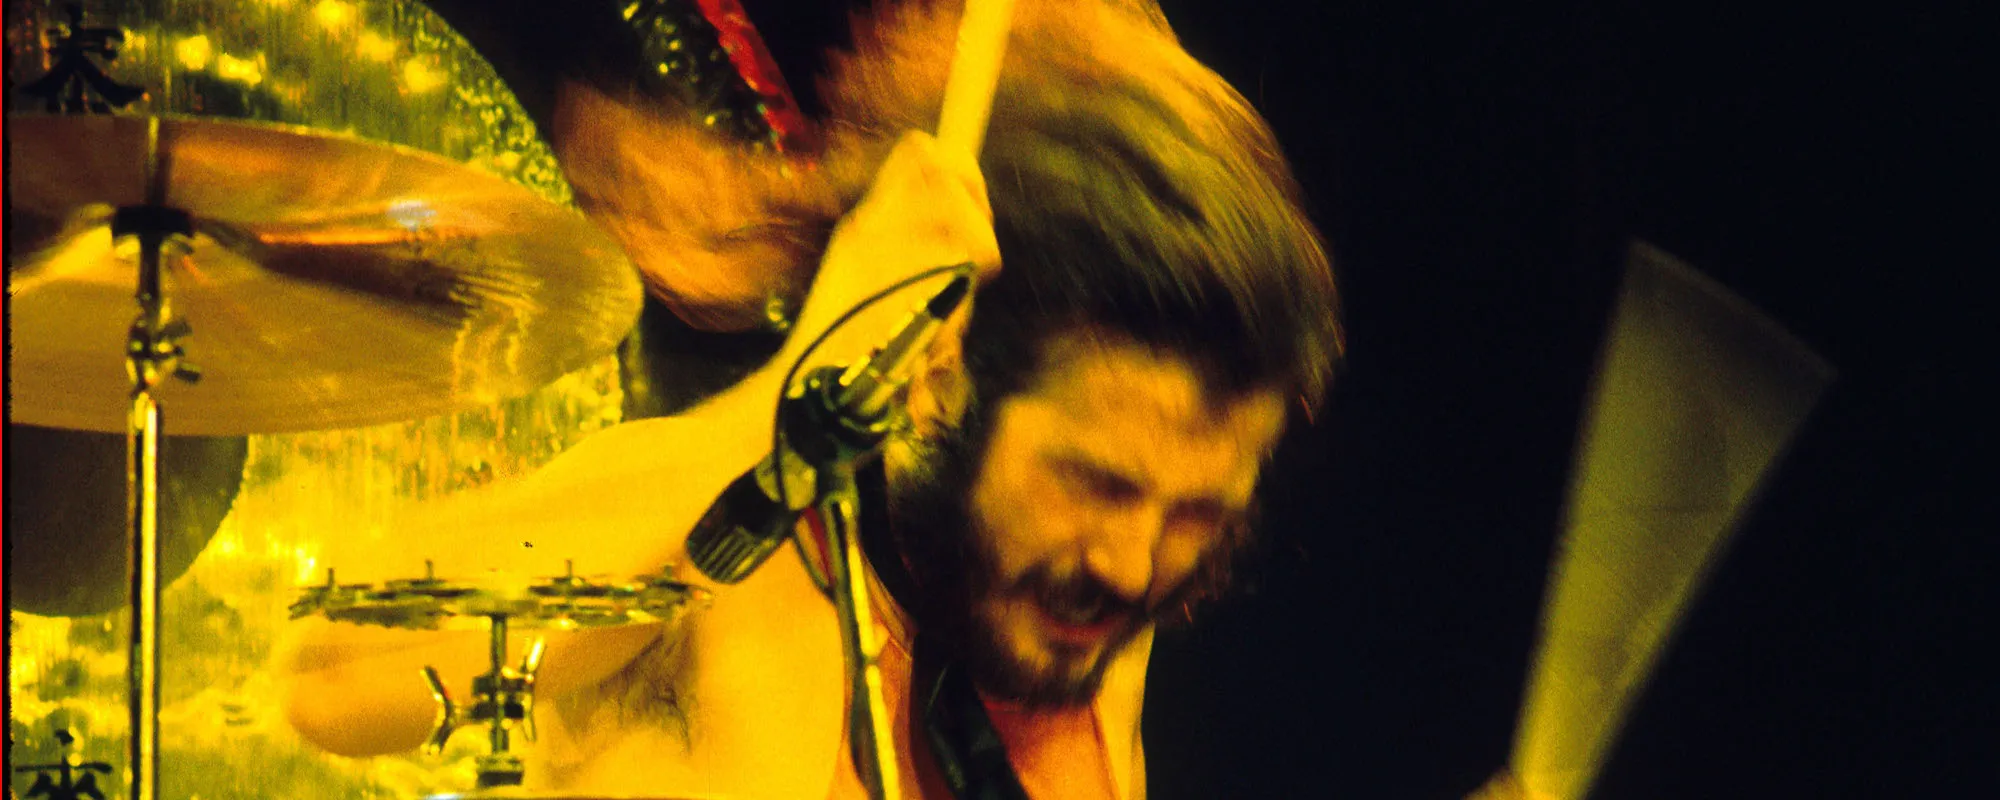 5 Iconic Drum Solos That Defined Rock & Roll